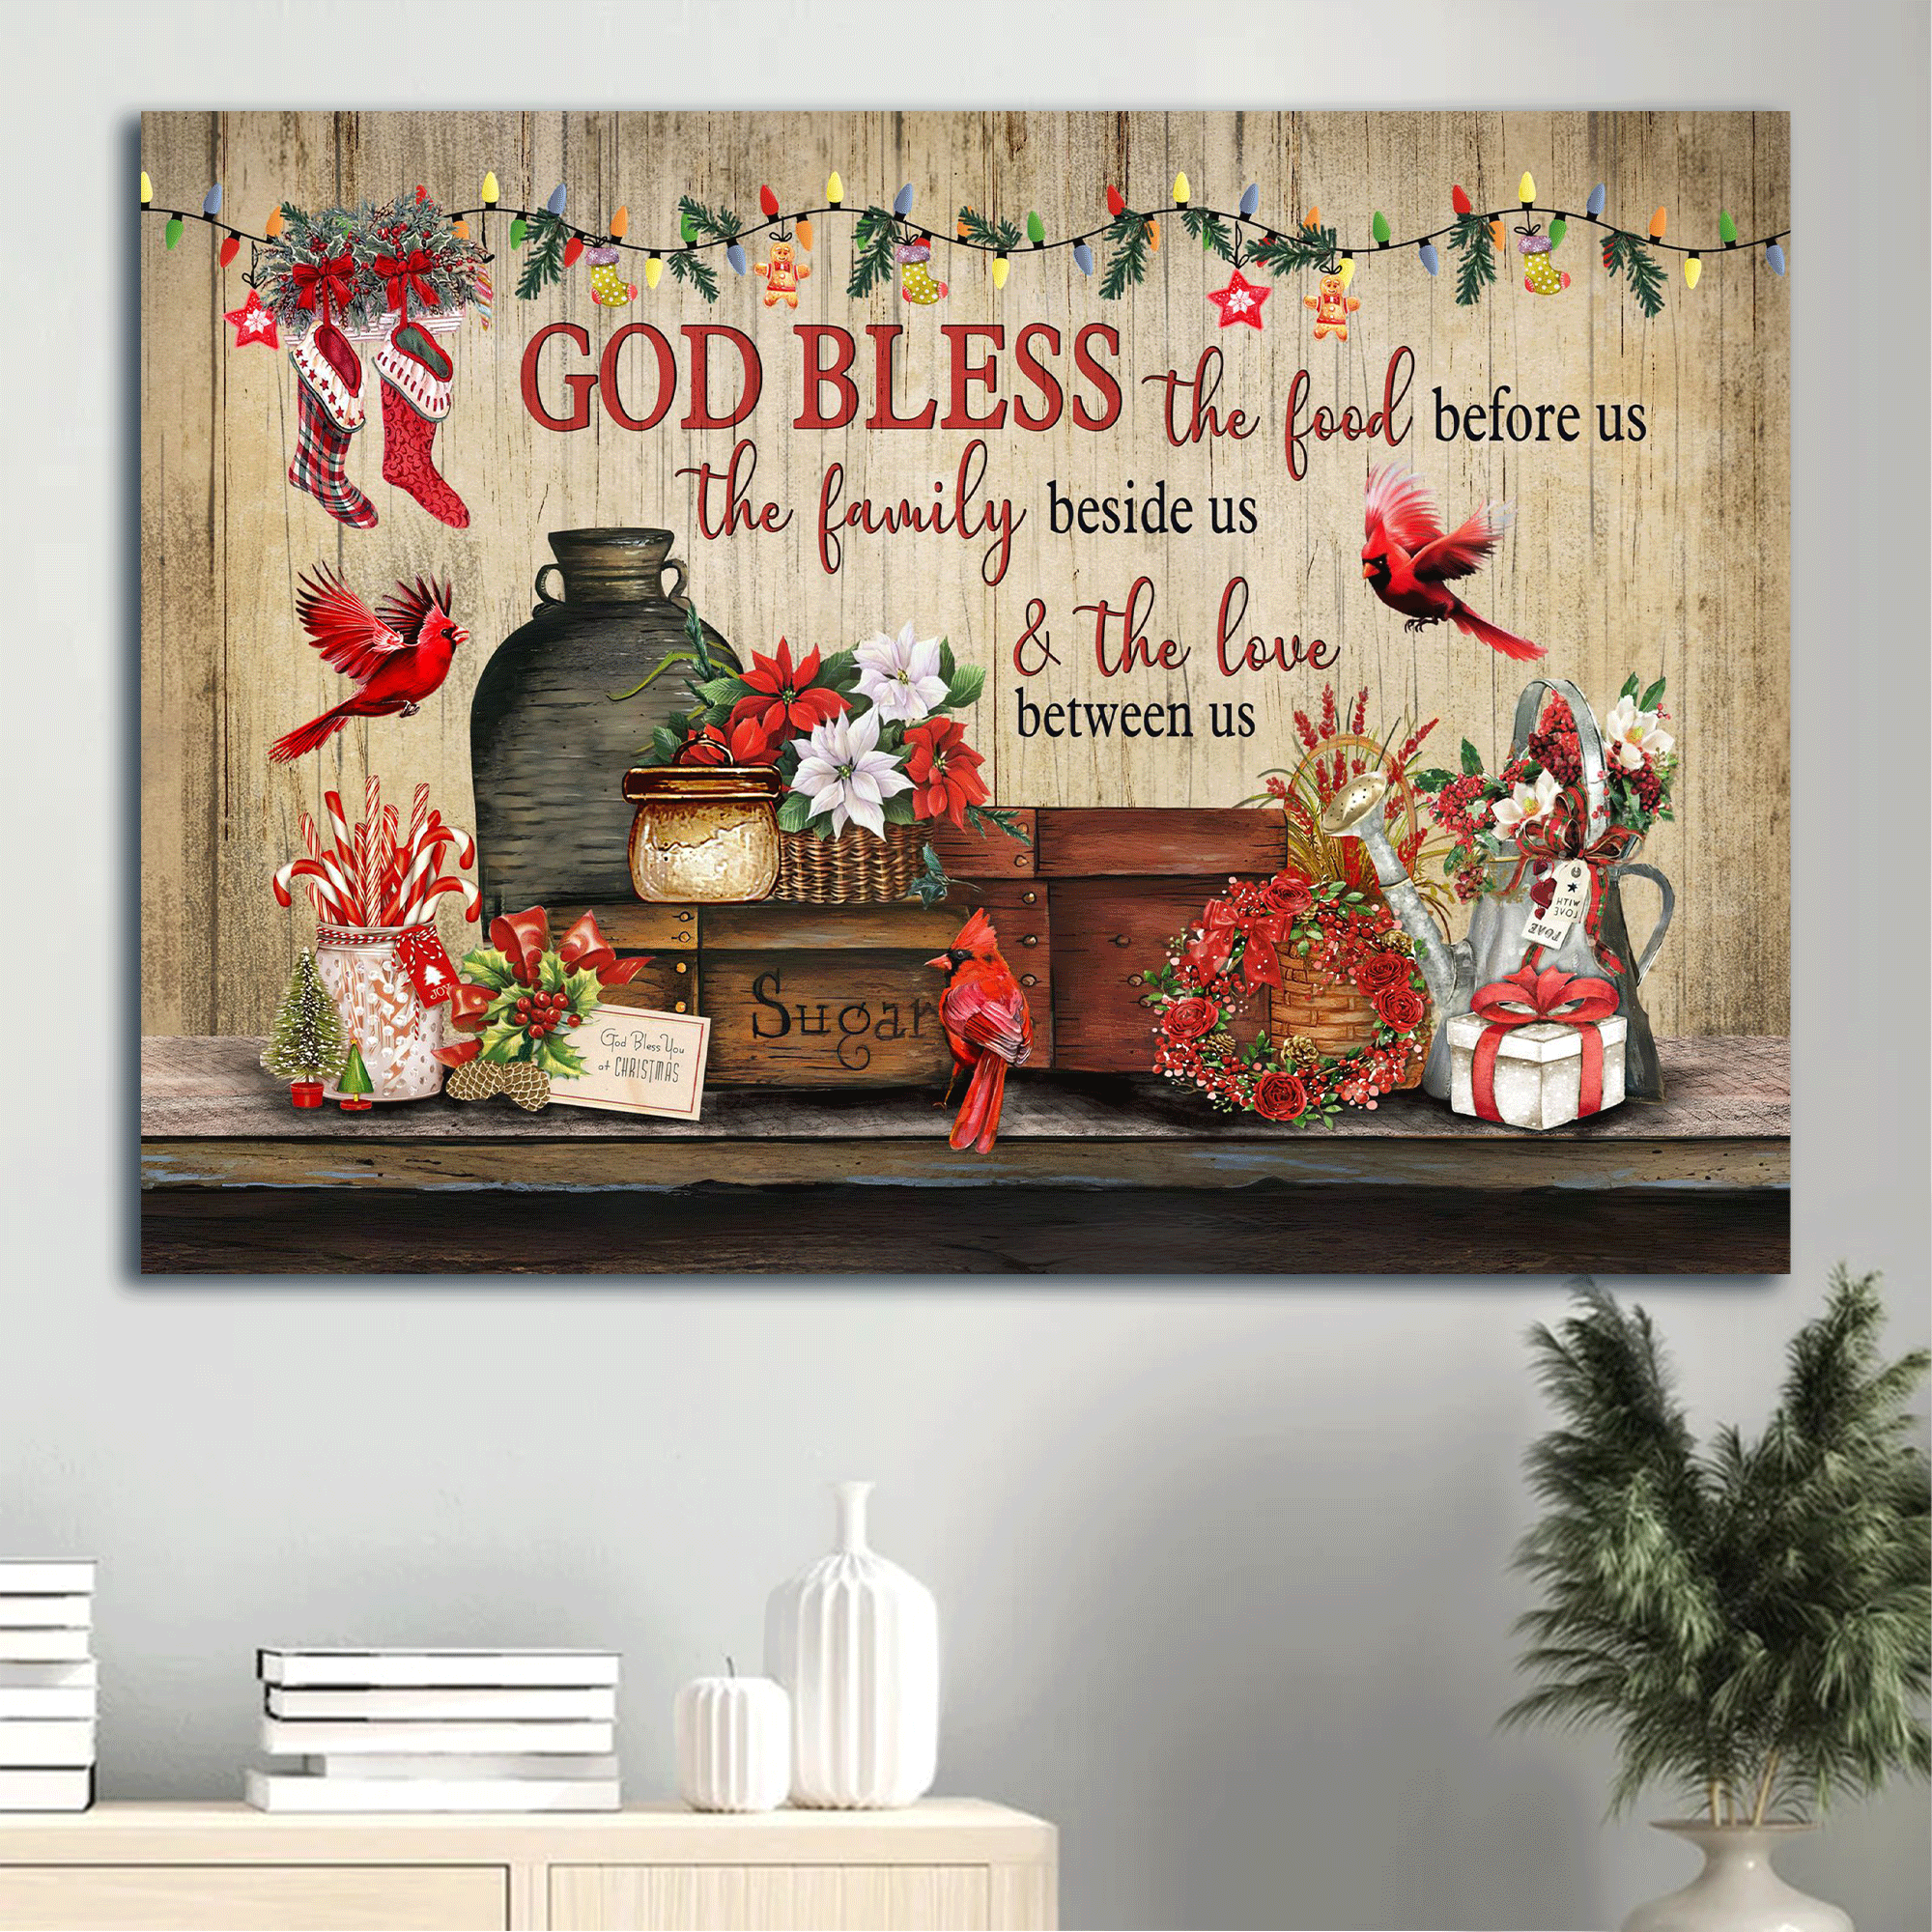 Jesus Landscape Canvas - Merry Christmas, Red Cardinal, Colorful Flower, Pretty Christmas Gift Box- Gift For Christian - God Bless The Food Before Us, The Family Beside Us & The Love Between Us